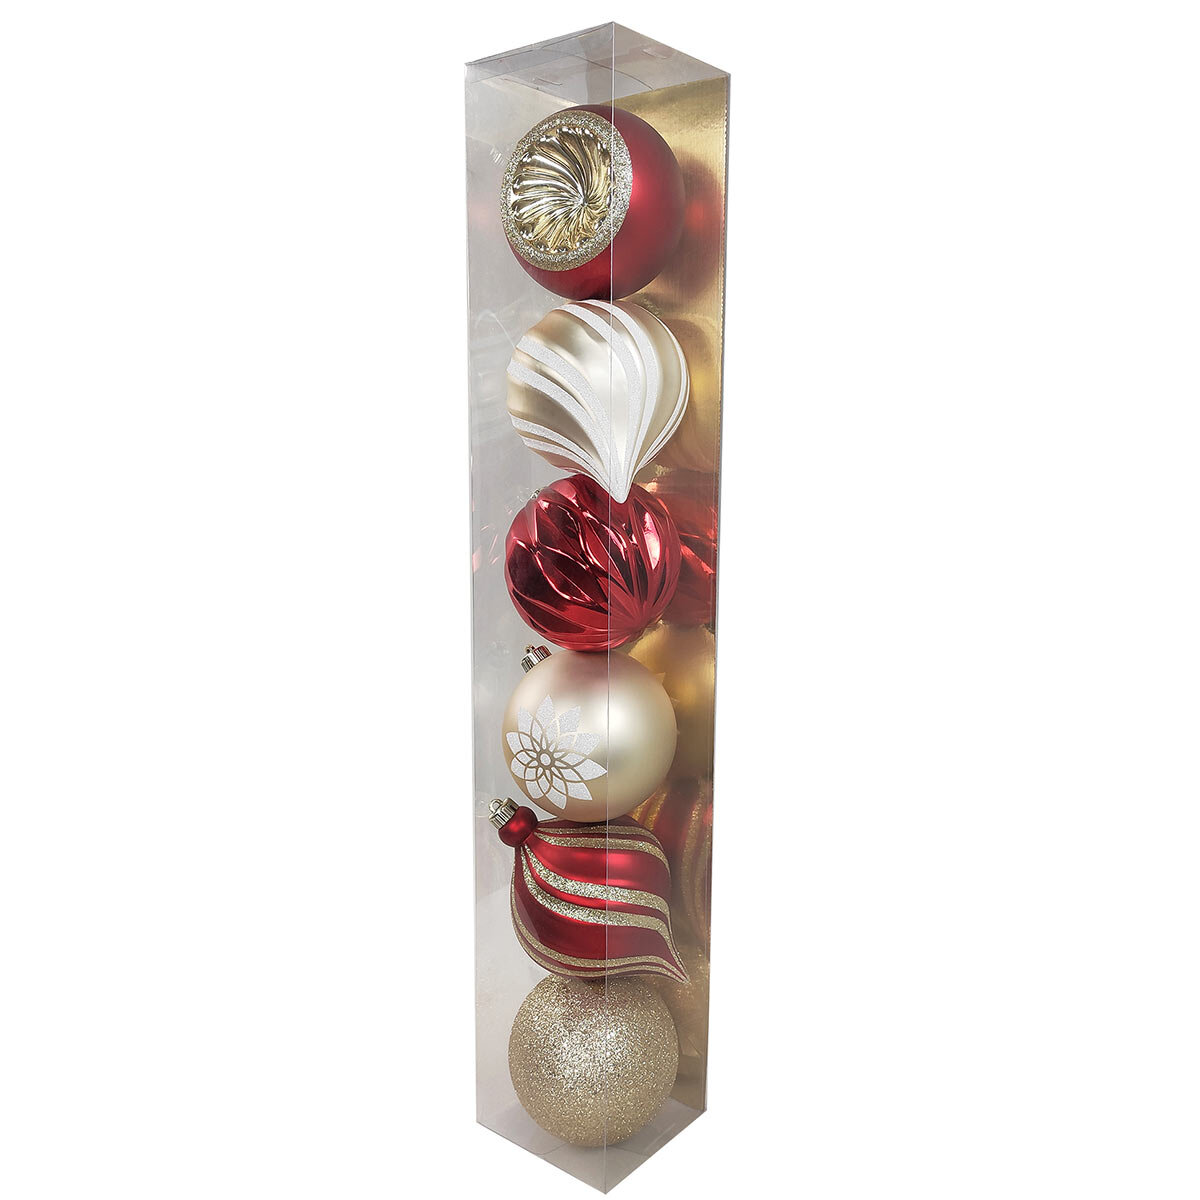 Buy Shatter Resistant Ornaments in Gold or Green Combined2 Image at Costco.co.uk